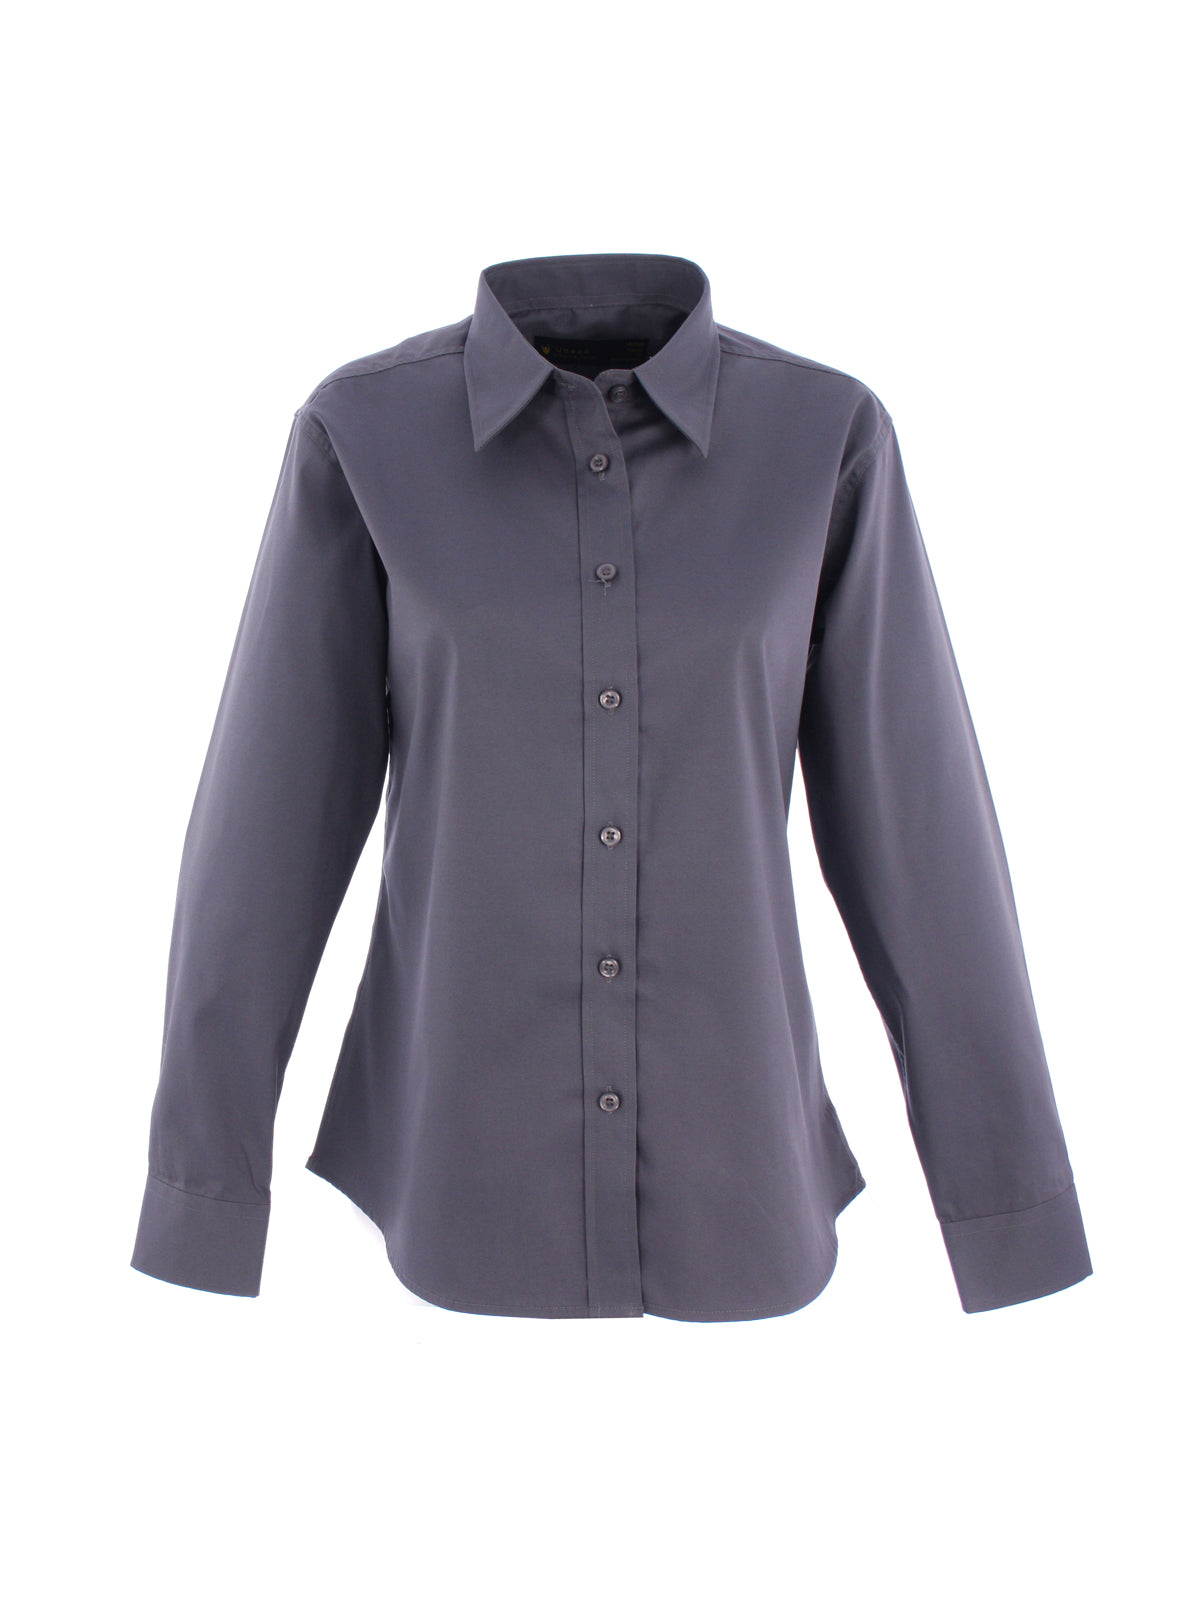 Uneek Ladies Pinpoint Oxford Full Sleeve Shirt UC703 - Charcoal